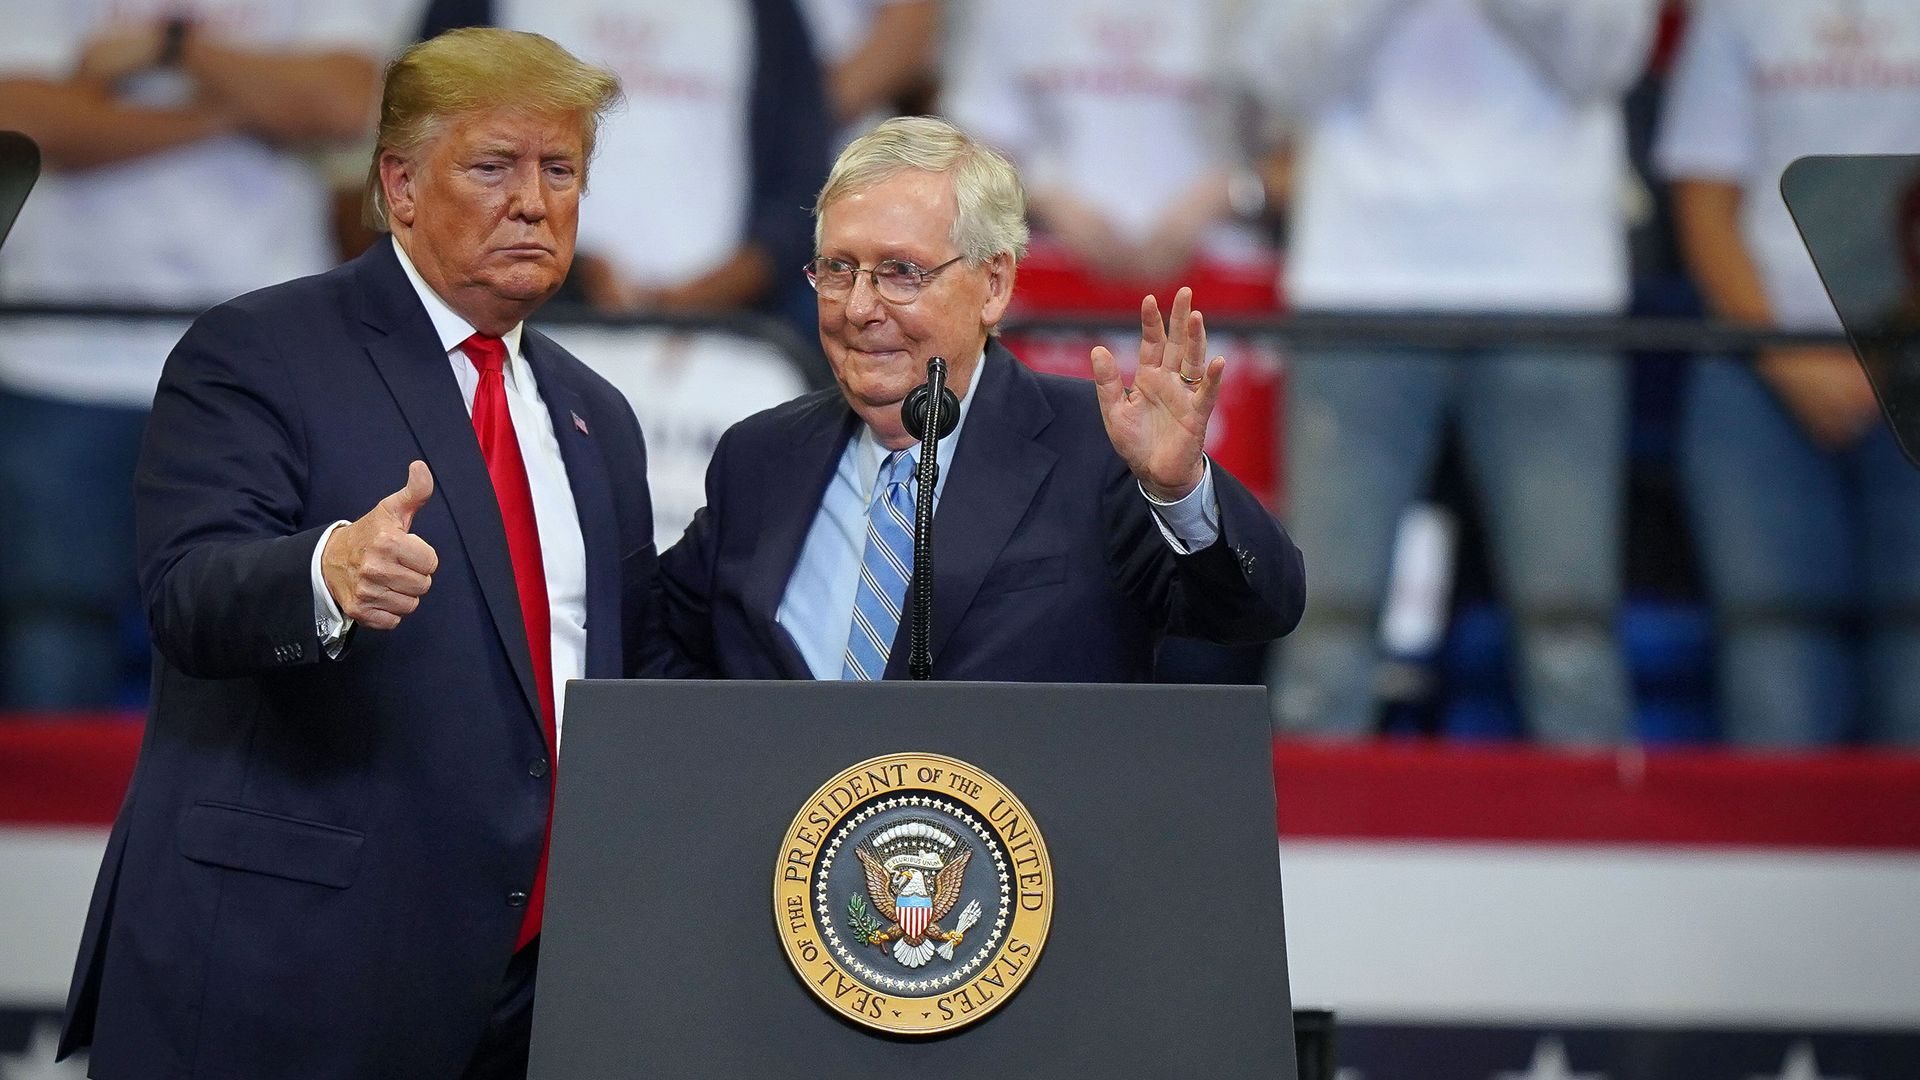 McConnell and Trump together at a rally